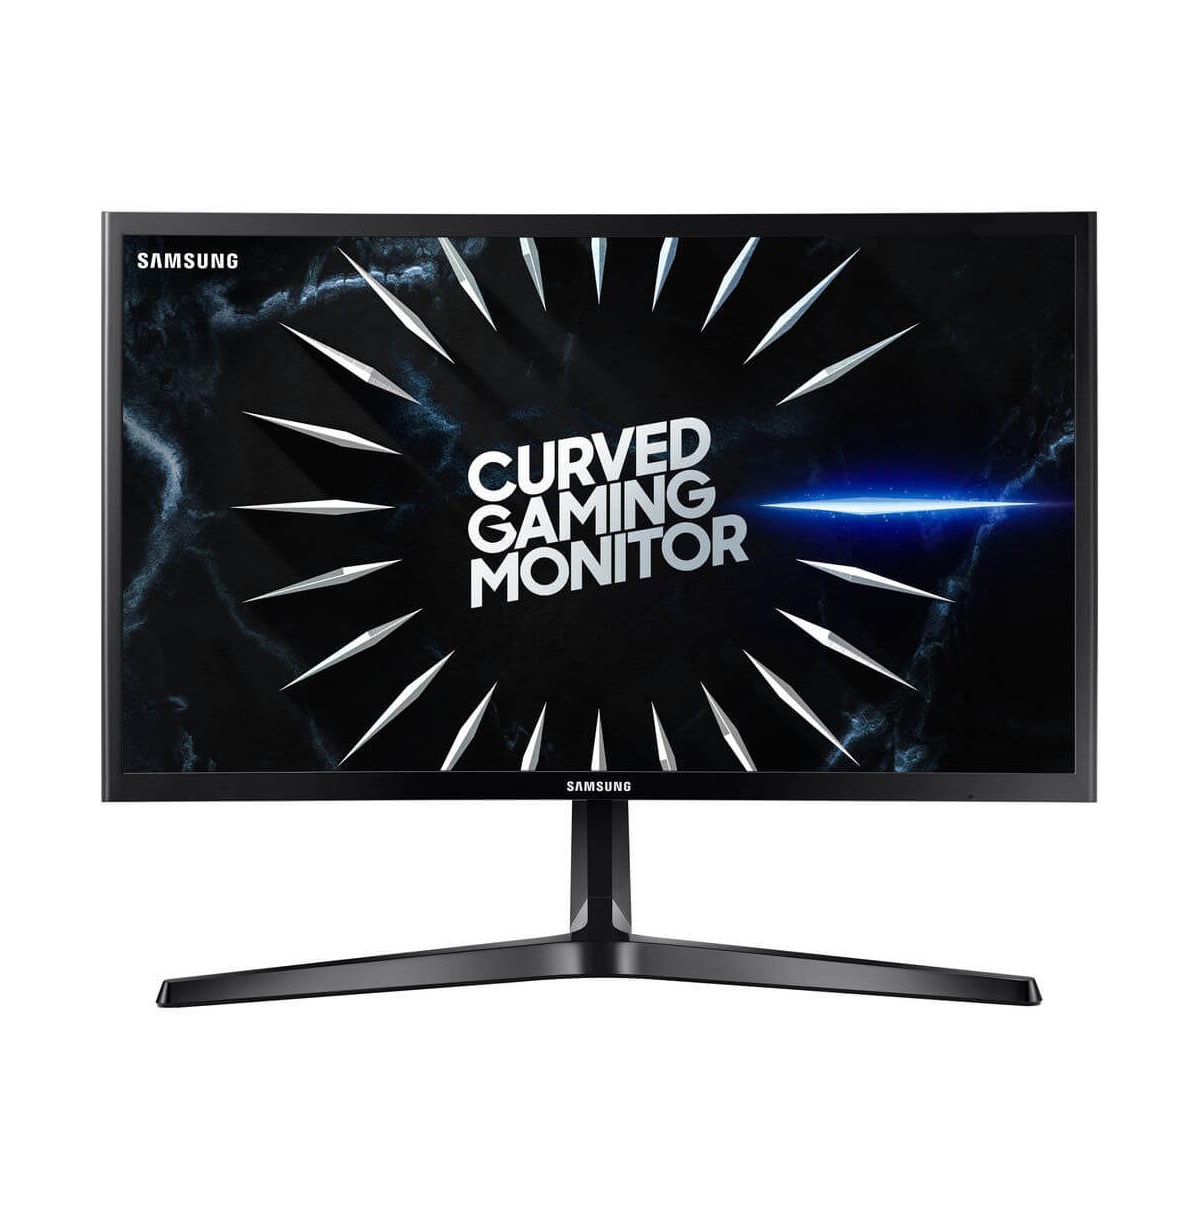 UPC 887276601779 product image for Samsung 23.5 inch Curved Gaming Monitor | upcitemdb.com